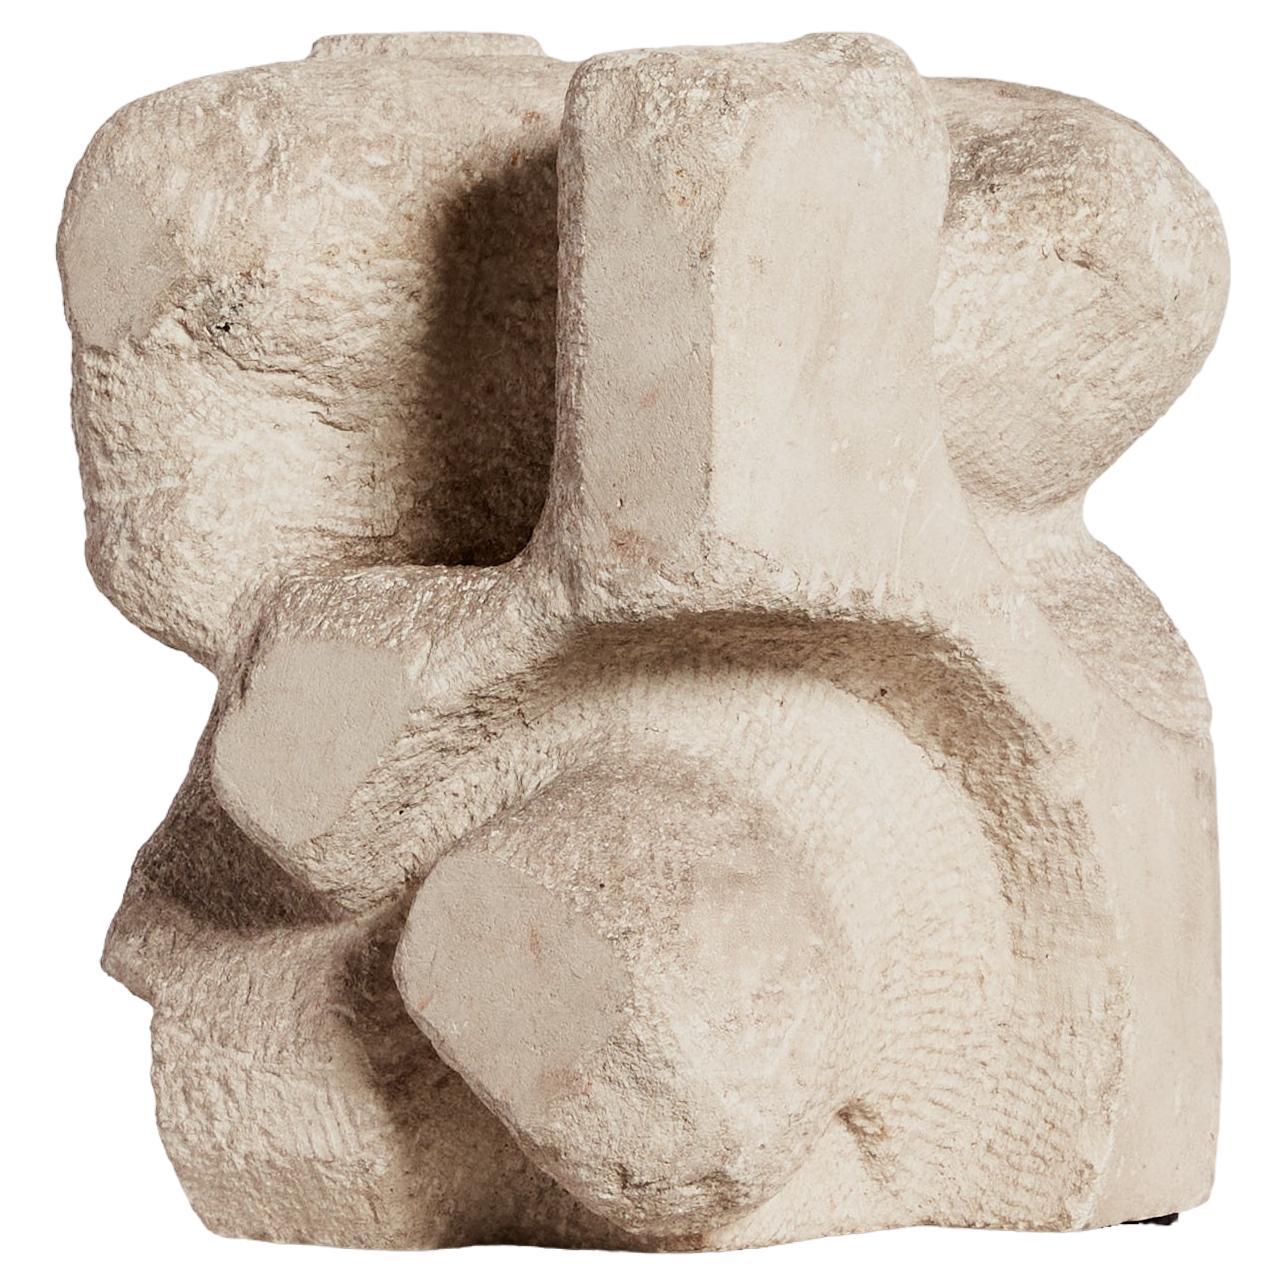 Hand carved Portland stone sculpture, with stippled textural surface and abstract cube form. Can be viewed from all angles.

Origin: British 

Year: Circa 1970's 

Material: Portland stone 

Dimensions: H30 xW23 x D25cm 

Condition: Vintage condition